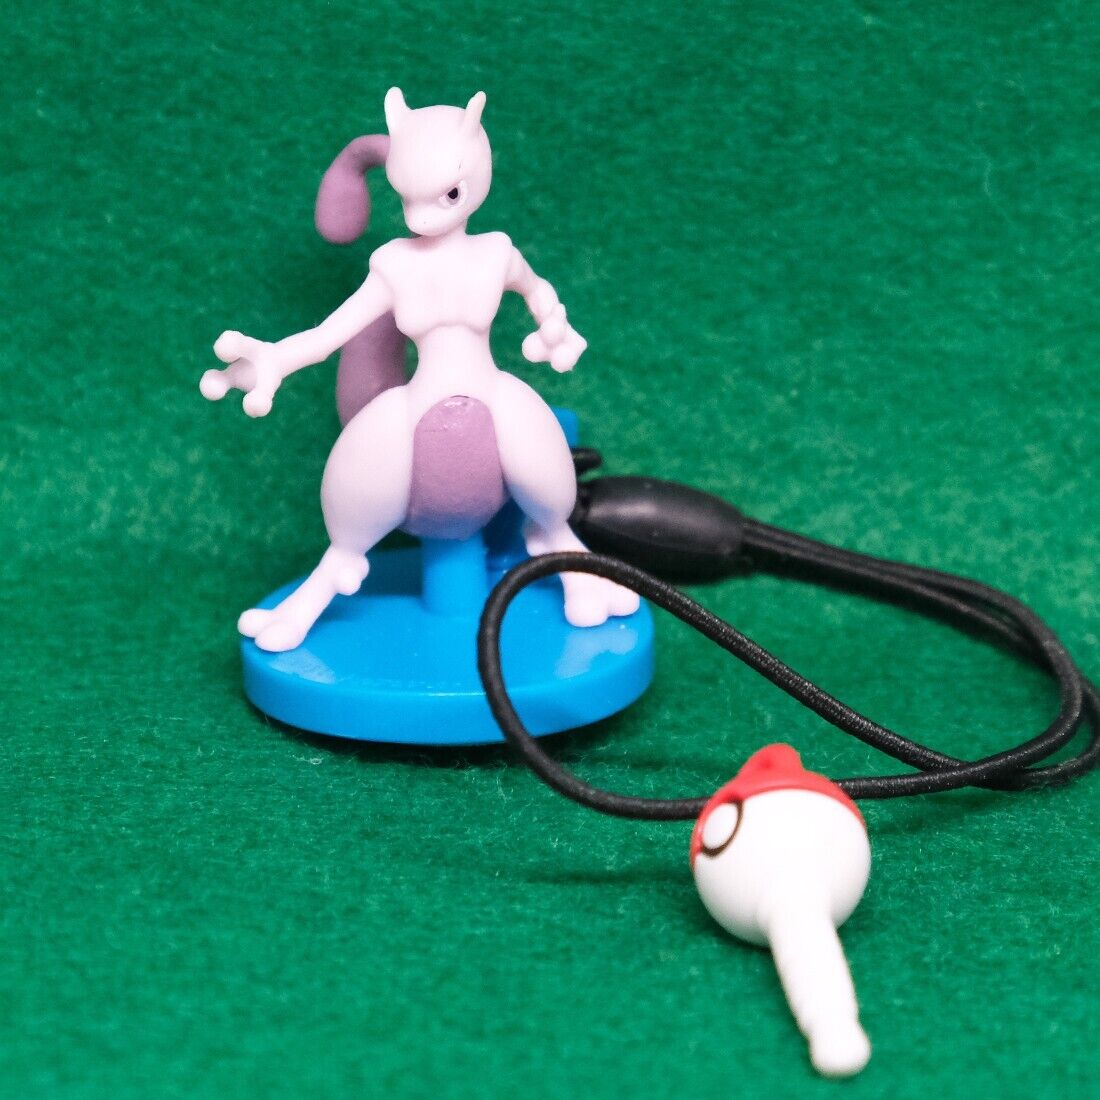 Mewtwo Pokemon Charm Strap Smartphone Cleaner Nintendo Very Rare From Japan F/S